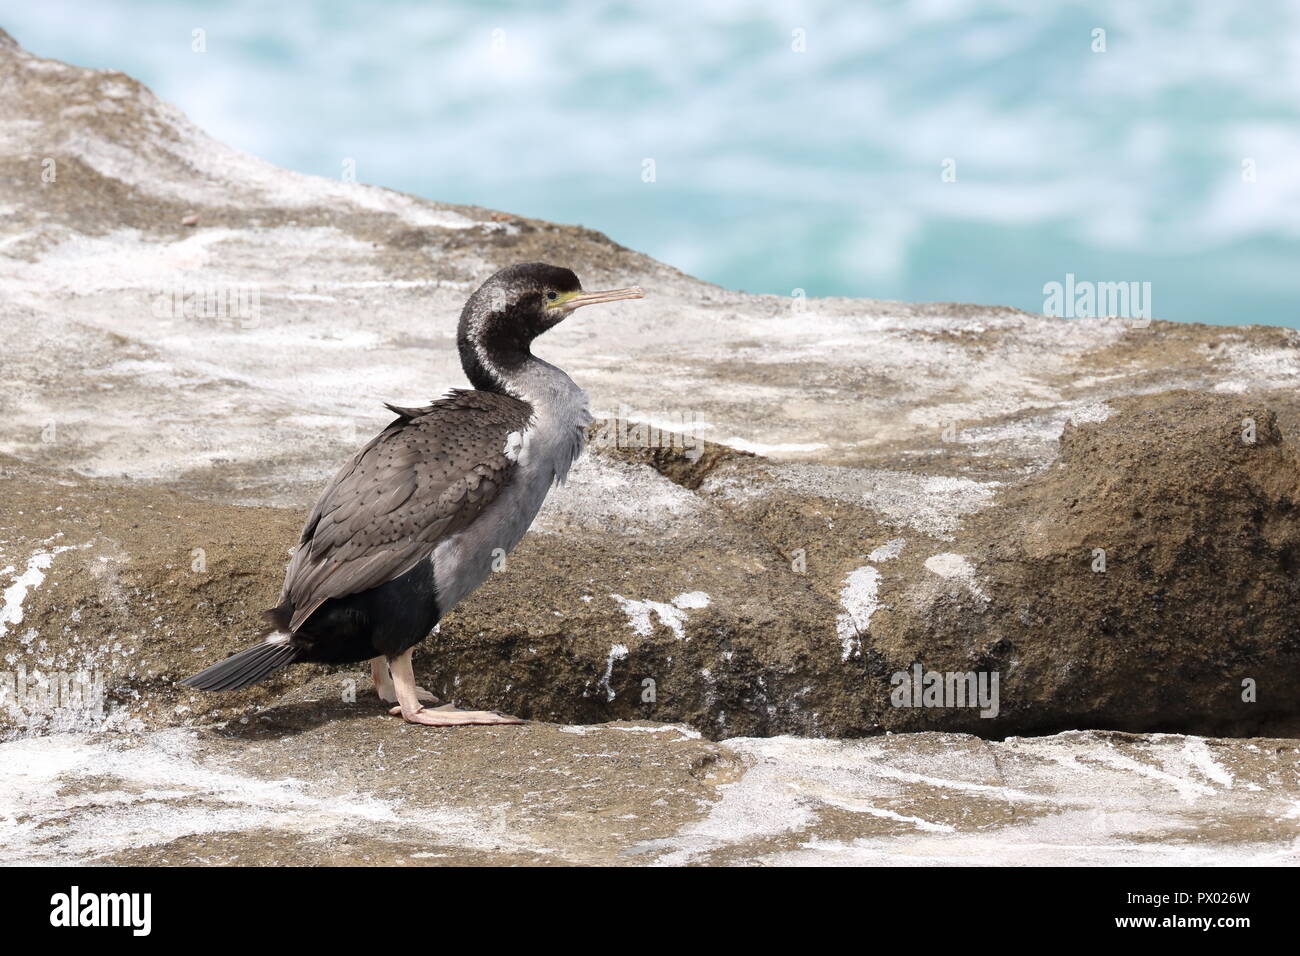 Spotted Shag (Stictocarbo punctatus) Cormorant with spots, on rocks Porpoise Bay, Curio Bay Cliffs, blue ocean background. Catlins, New Zealand bird Stock Photo